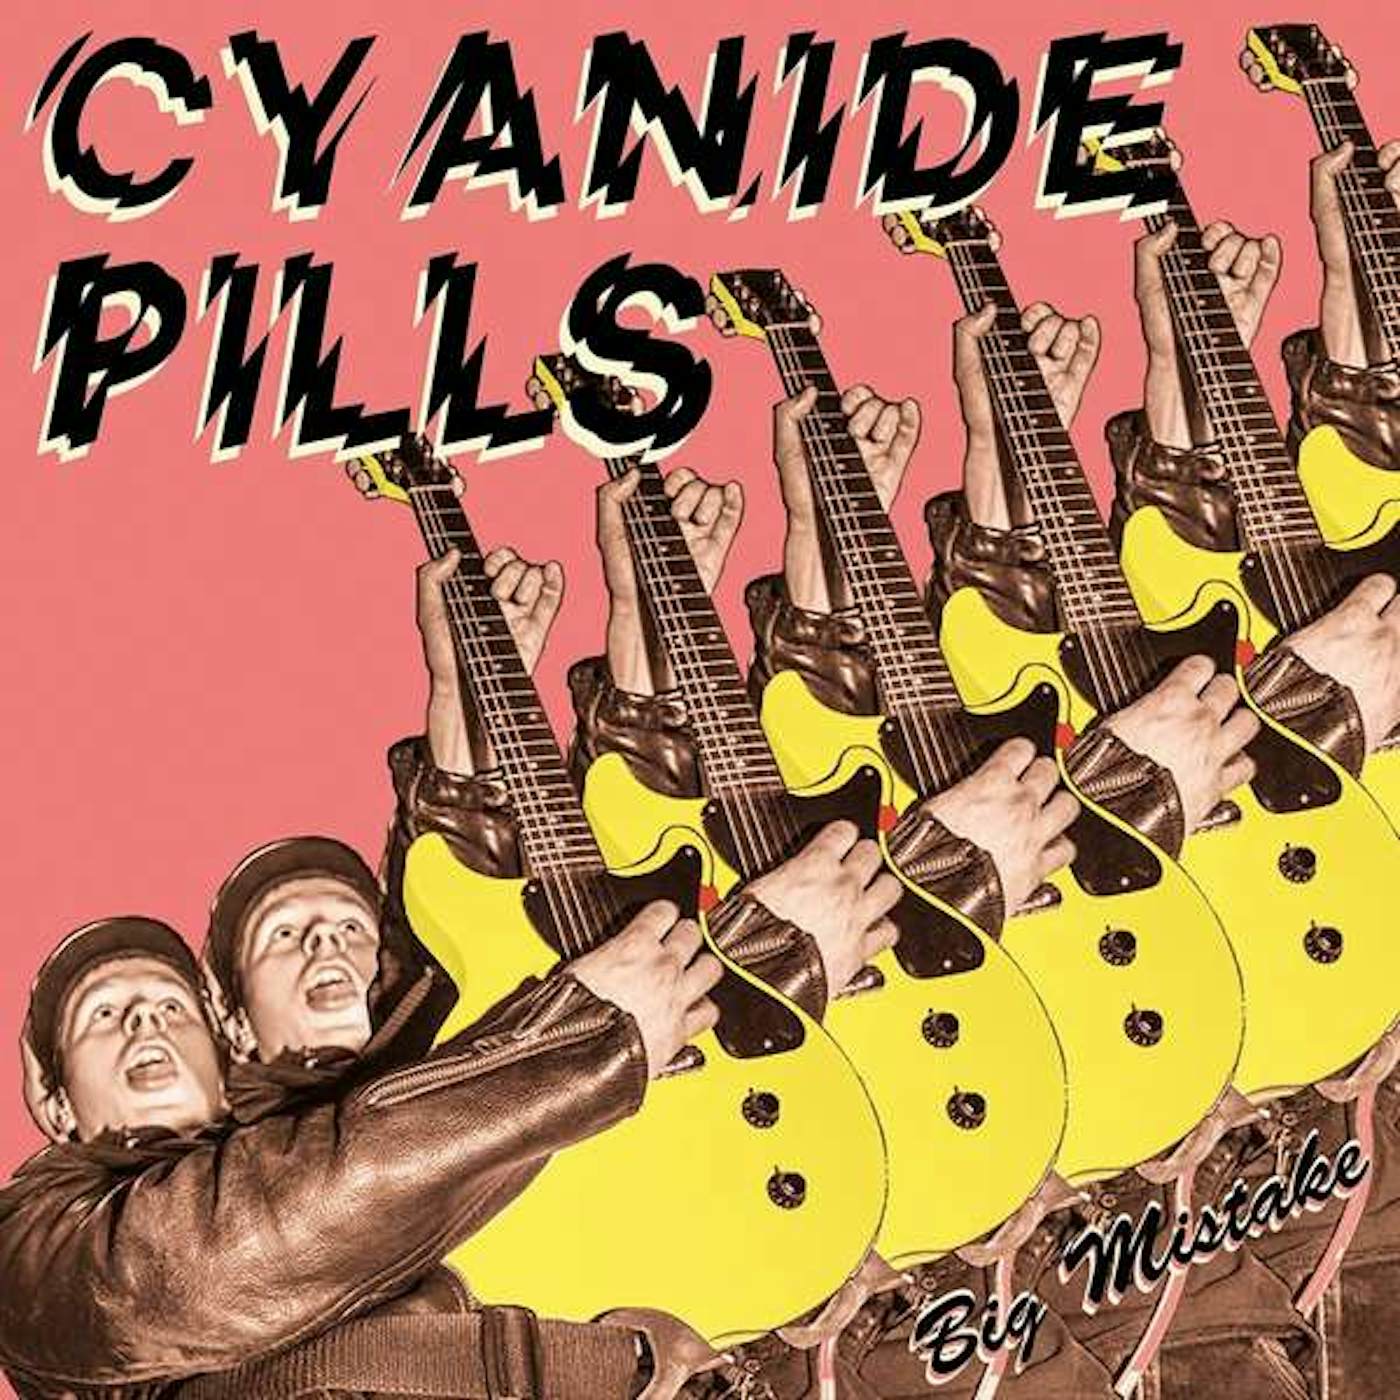 Cyanide Pills BIG MISTAKE / MY BABY'S BECOME A RIGHT WING Vinyl Record